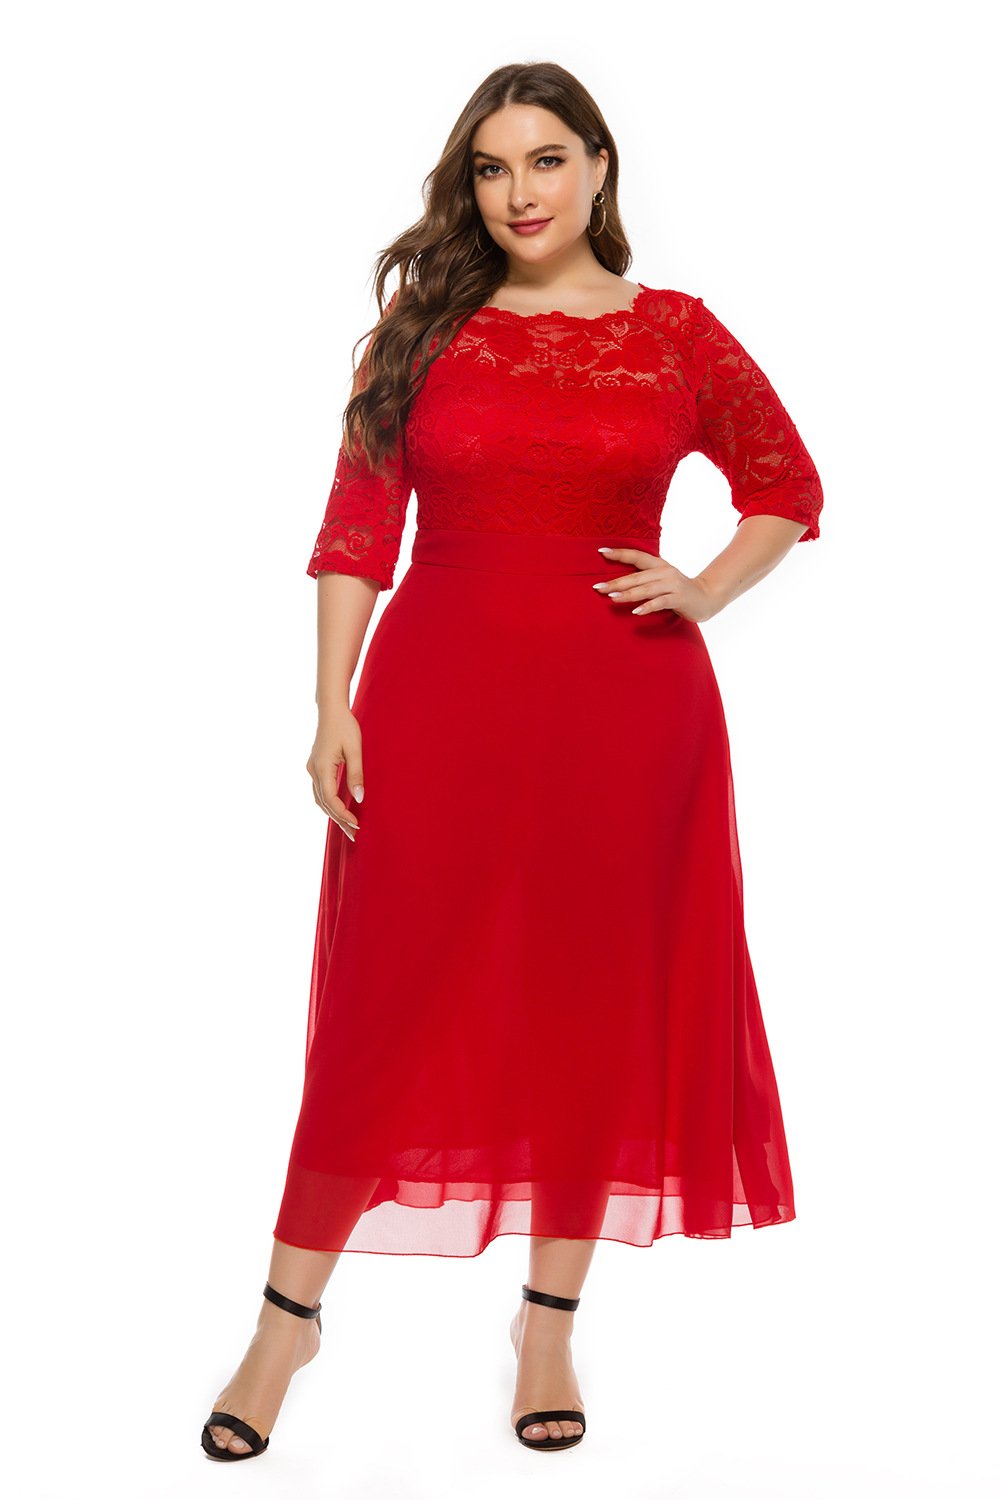 Red 3/4 Length Sleeves Lace Red Plus Size Dresses-STYLEGOING